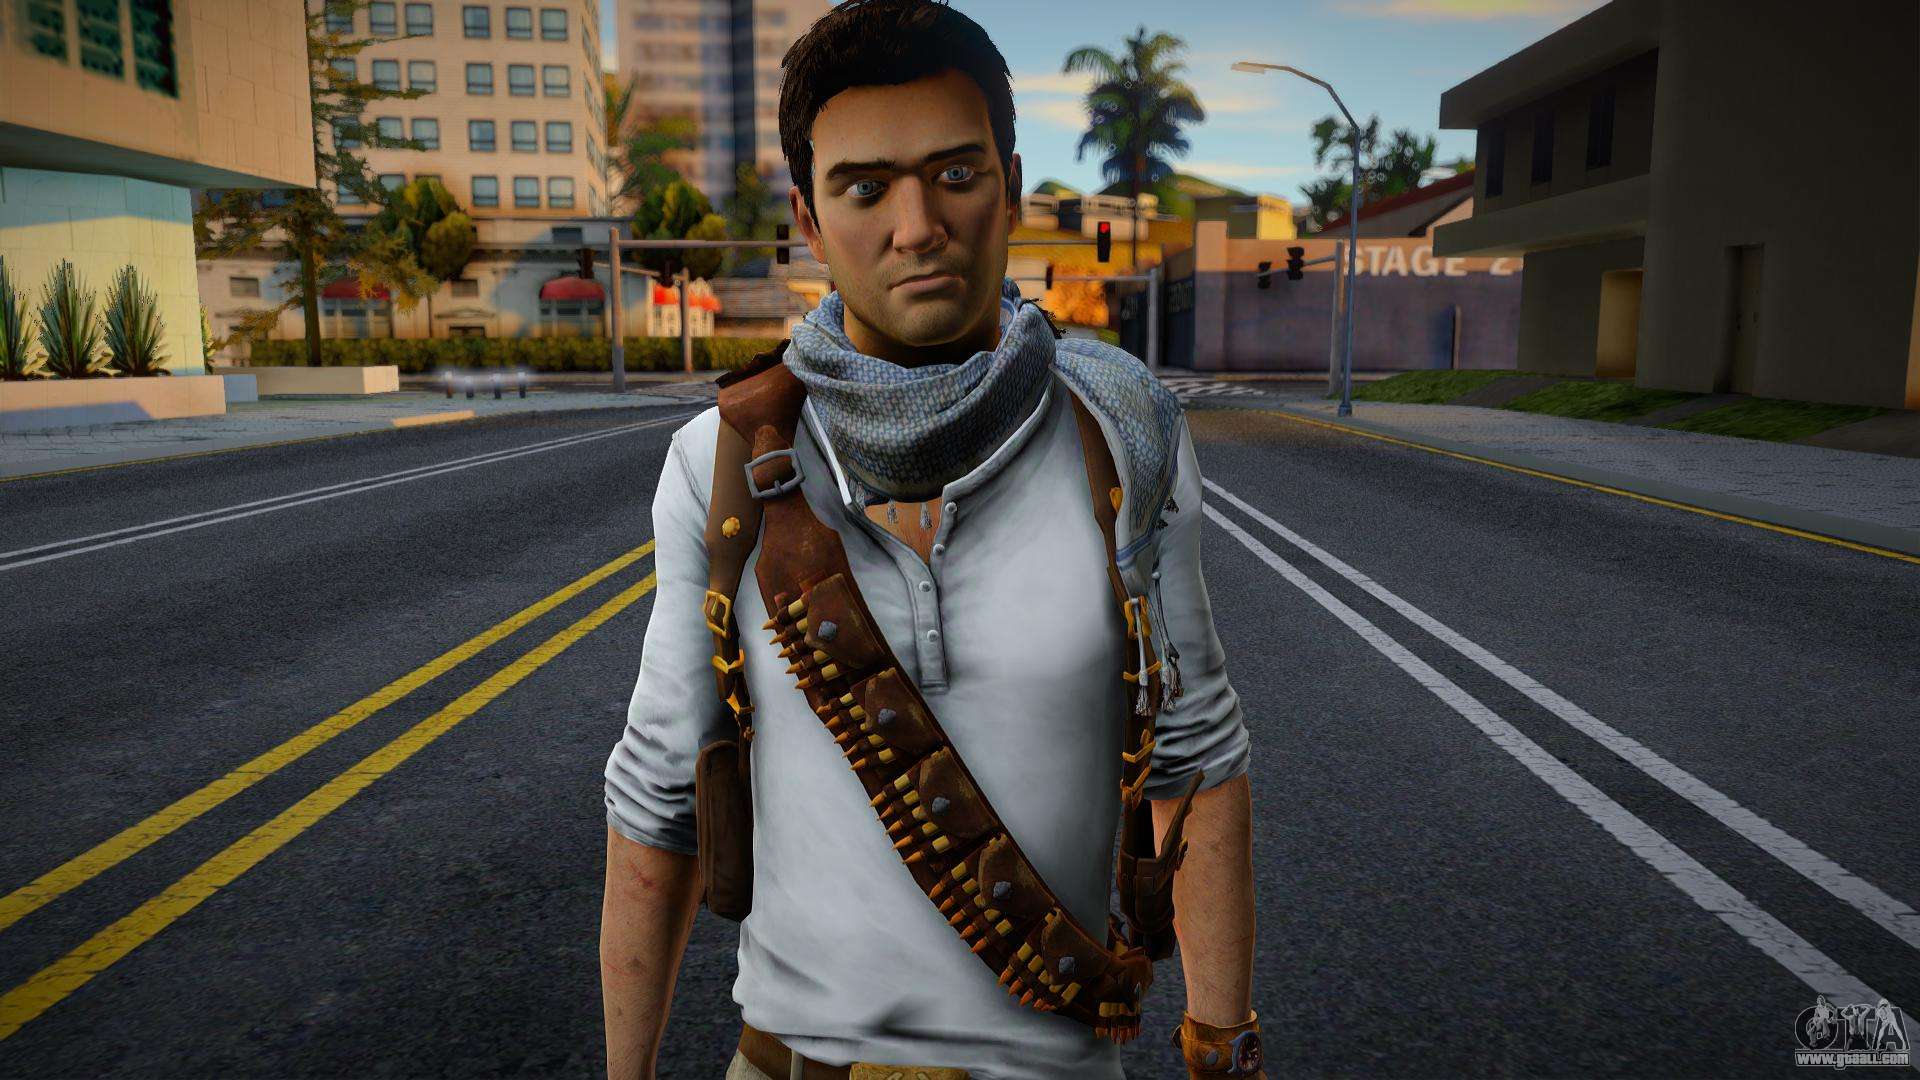 Uncharted 3 - Nathan Drake Desert Outfit for GTA San Andreas